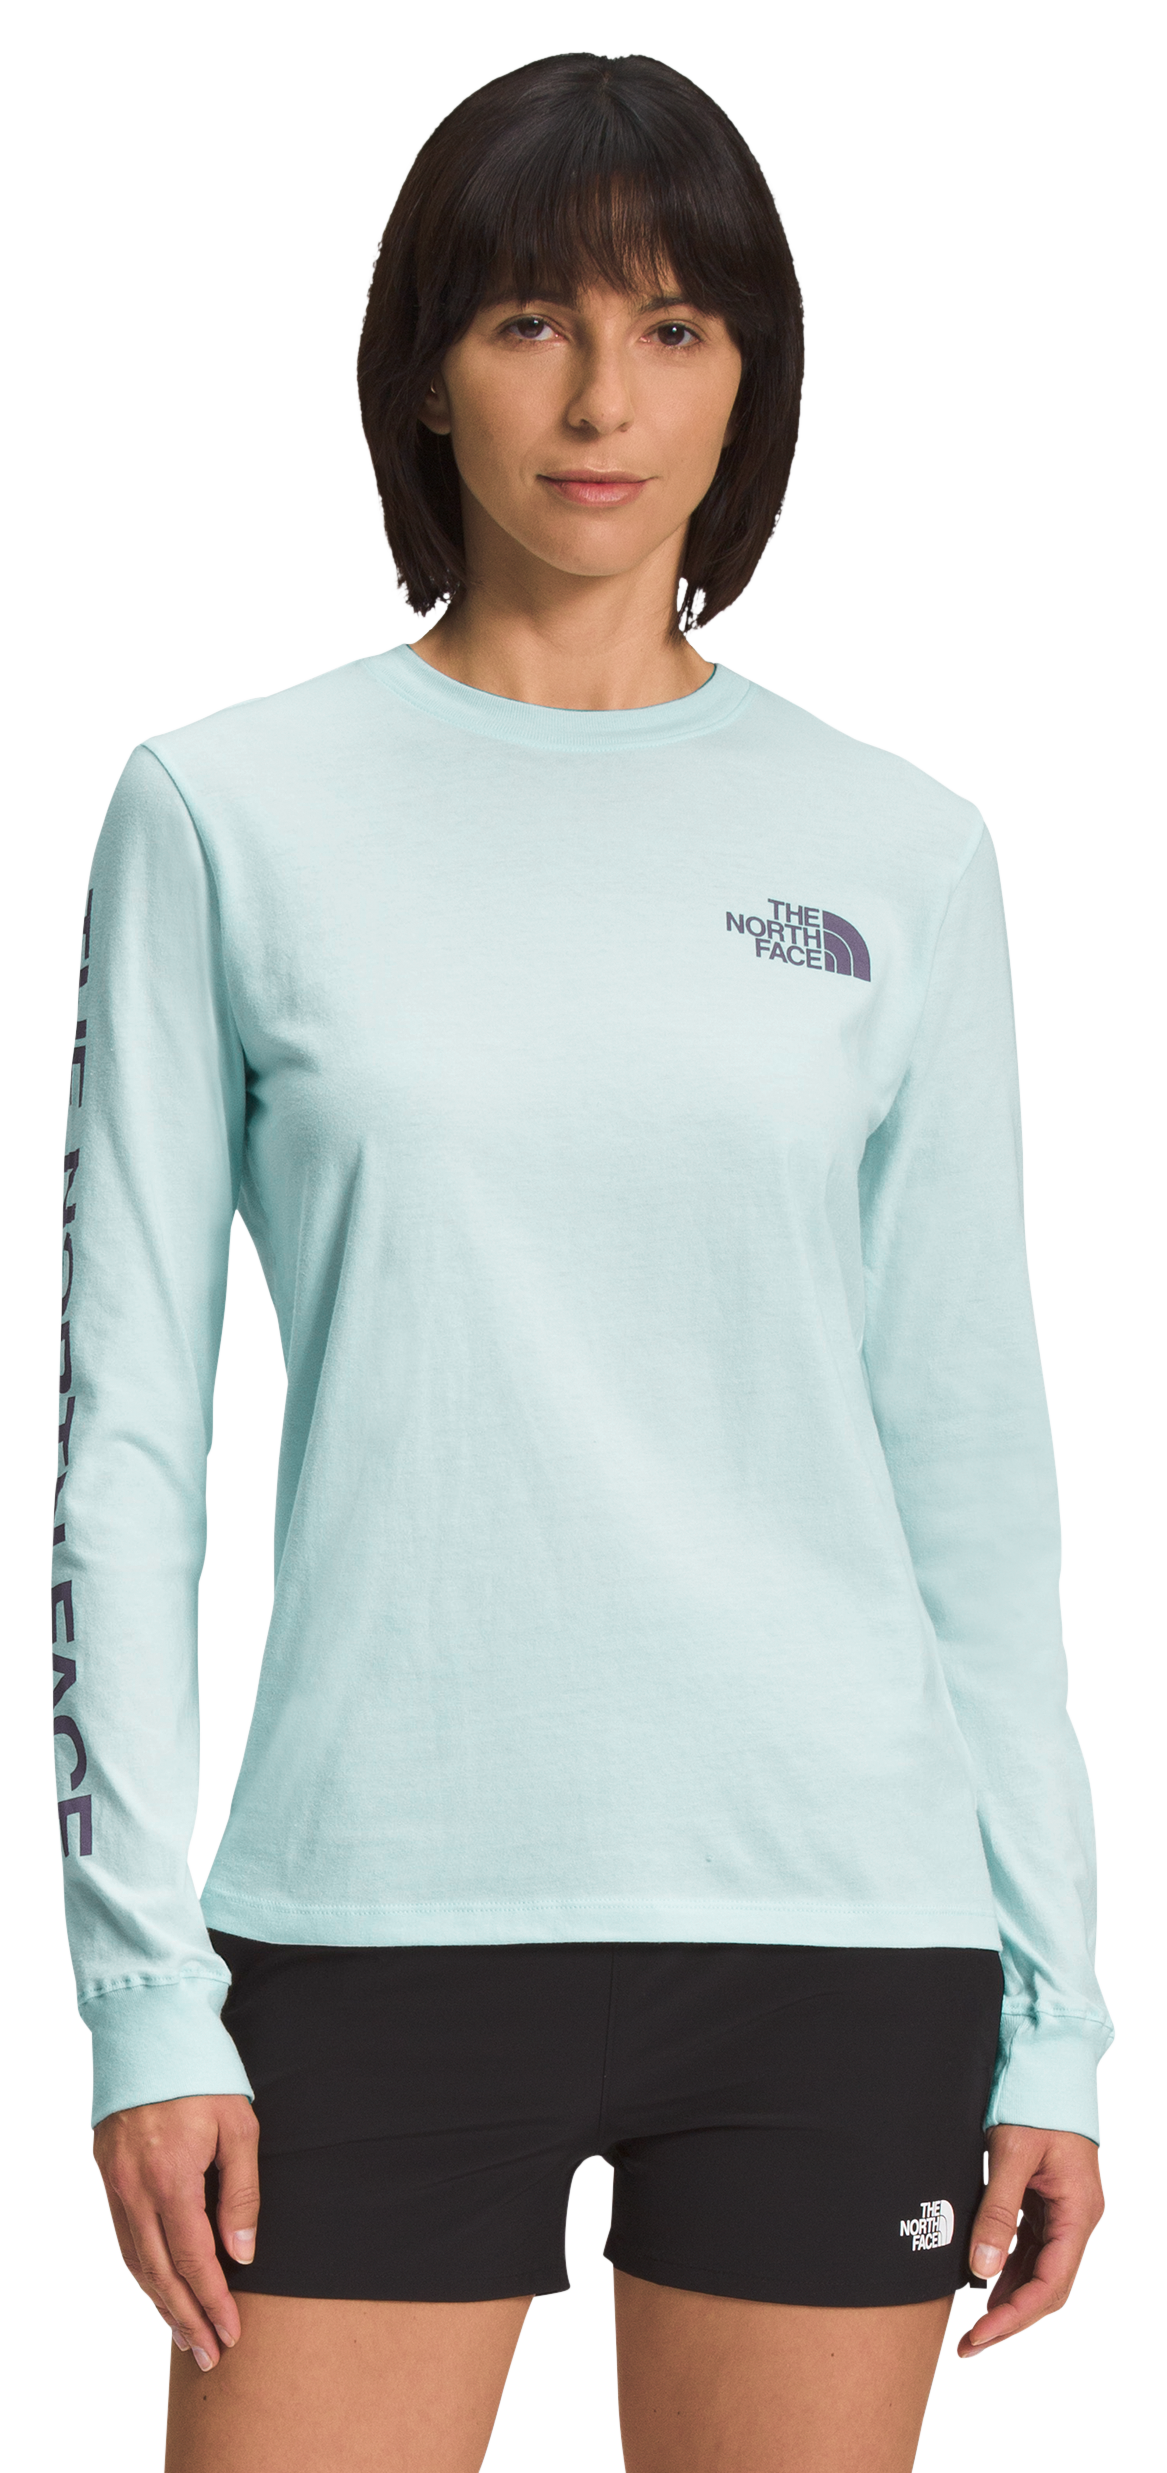 The North Face Hit Graphic Long-Sleeve T-Shirt for Ladies - Skylight Blue/Lunar Slate - S